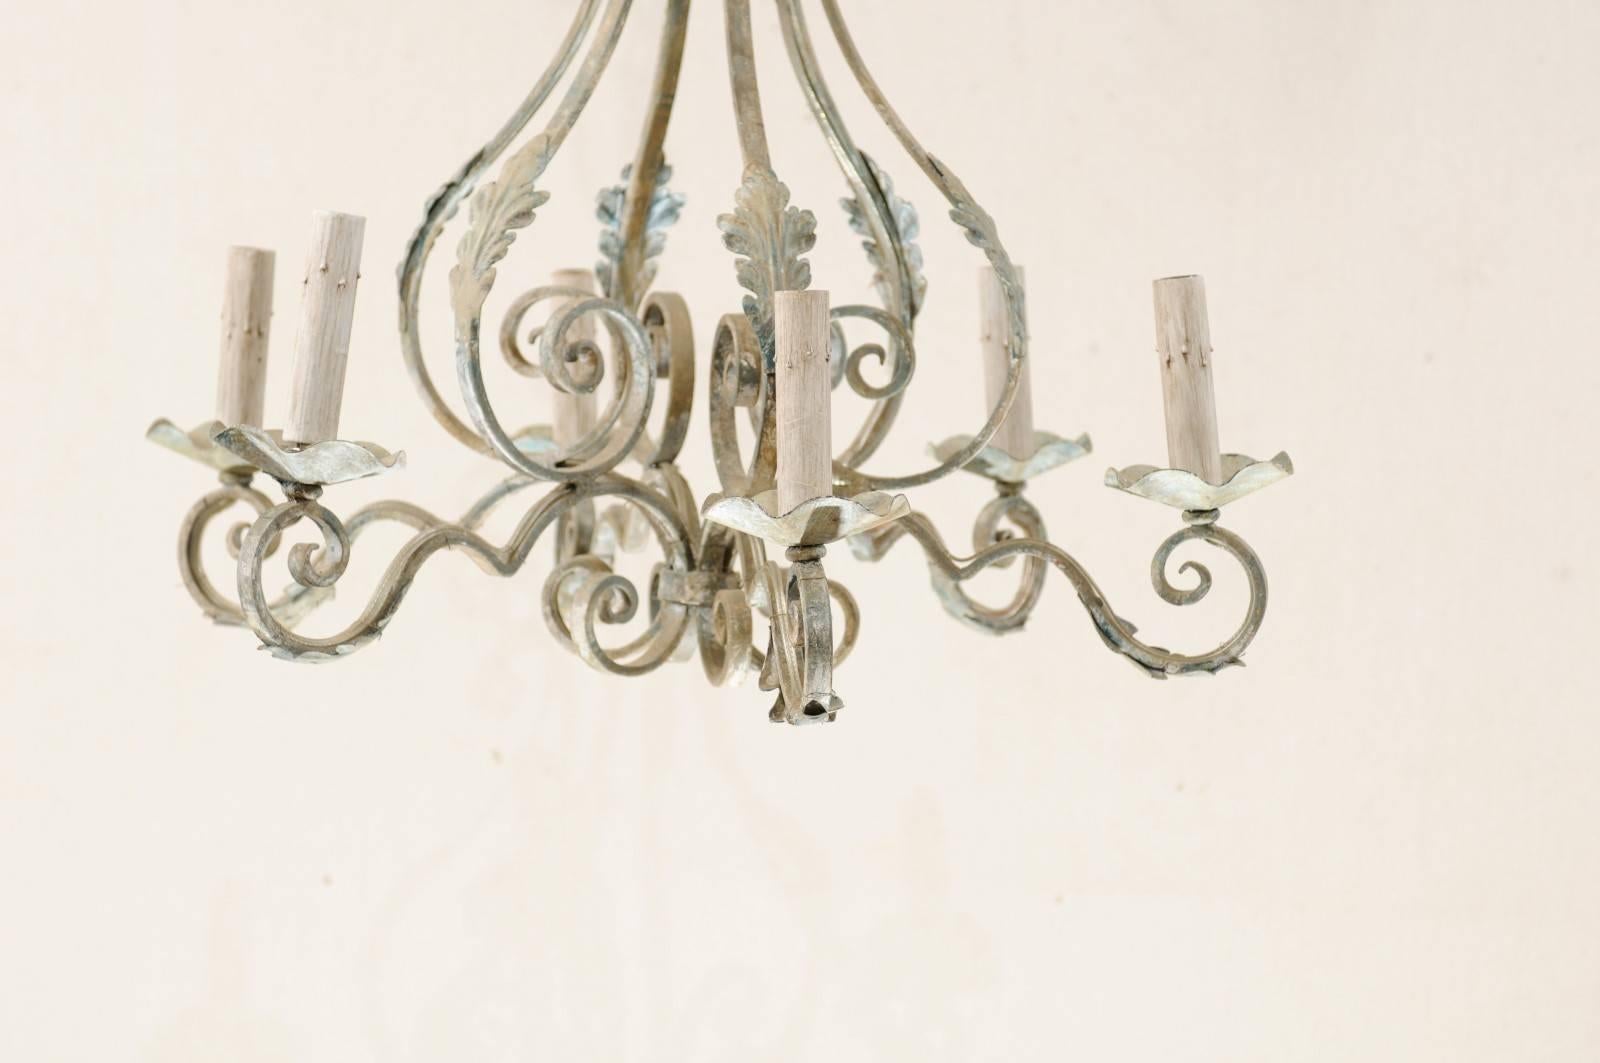 French Six-Light Pear Shaped Painted Iron Chandelier with Ornate Scrolls For Sale 2